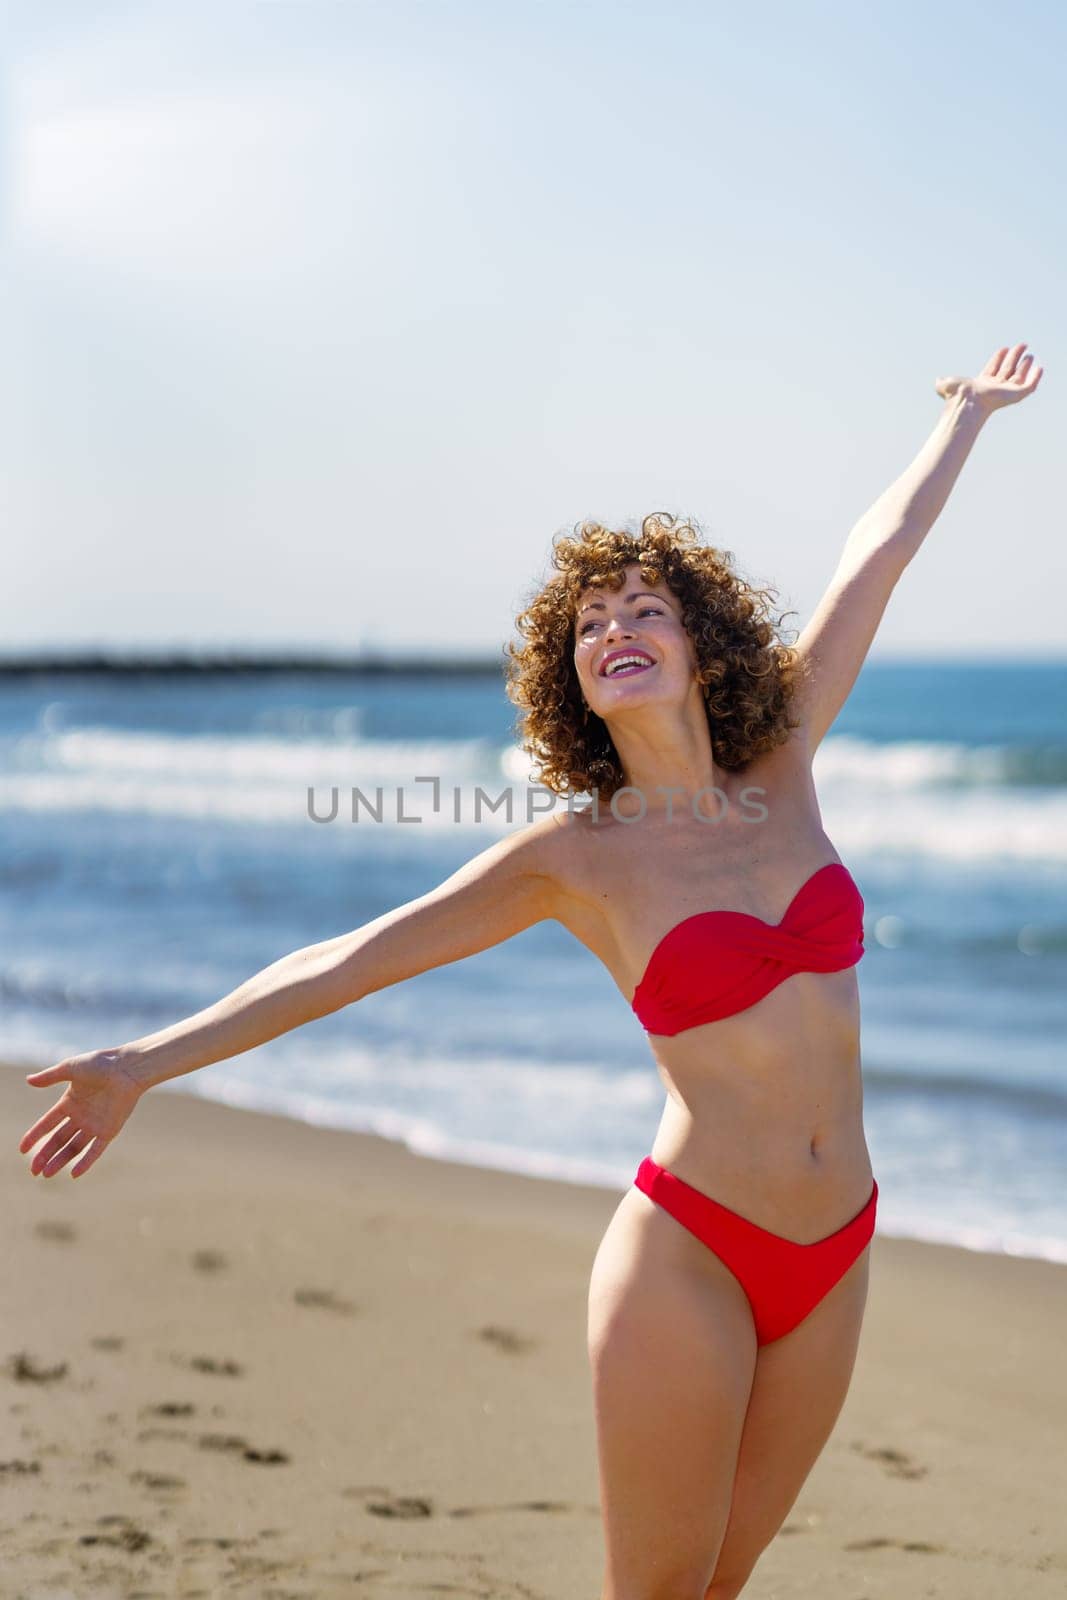 Cheerful young female with curly ginger hair in bikini, standing on sandy beach and smiling with stretched arms towards sky and earth in sunlight while looking away against blurred seawater